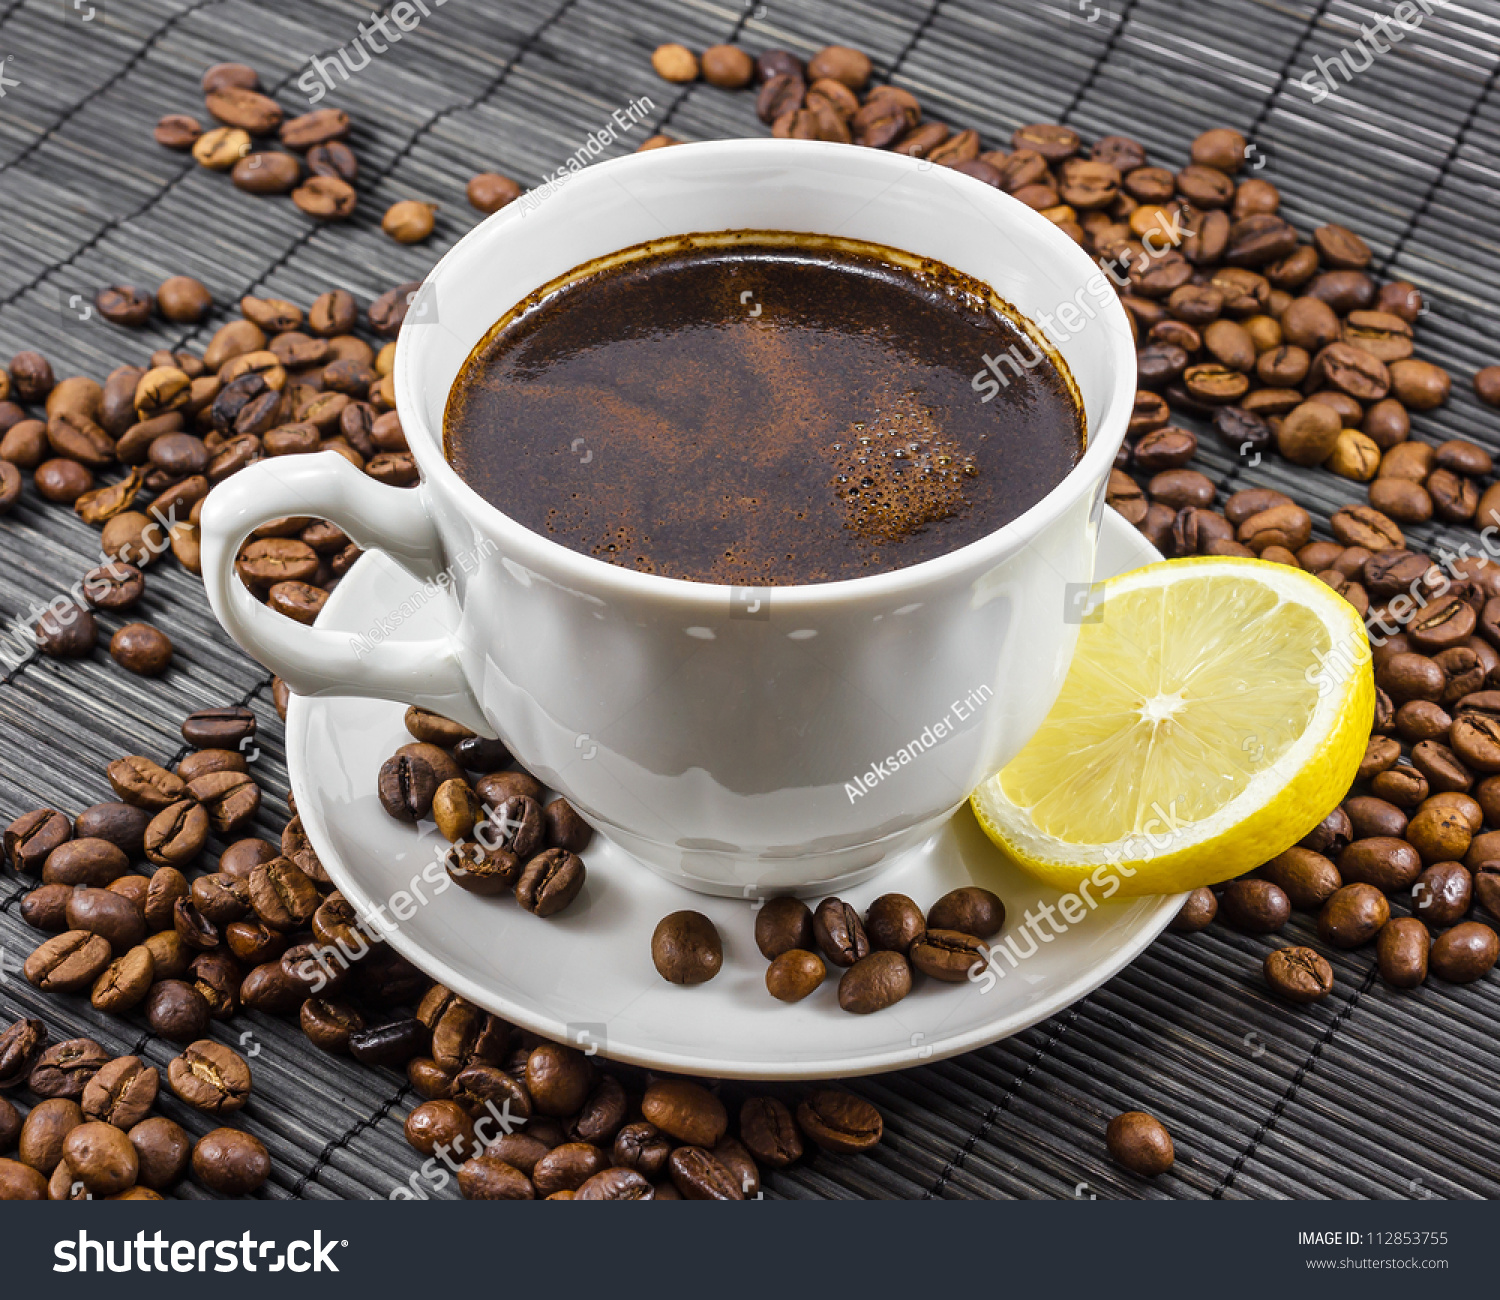 Warm cup of coffee with a coffee beans on background #112853755